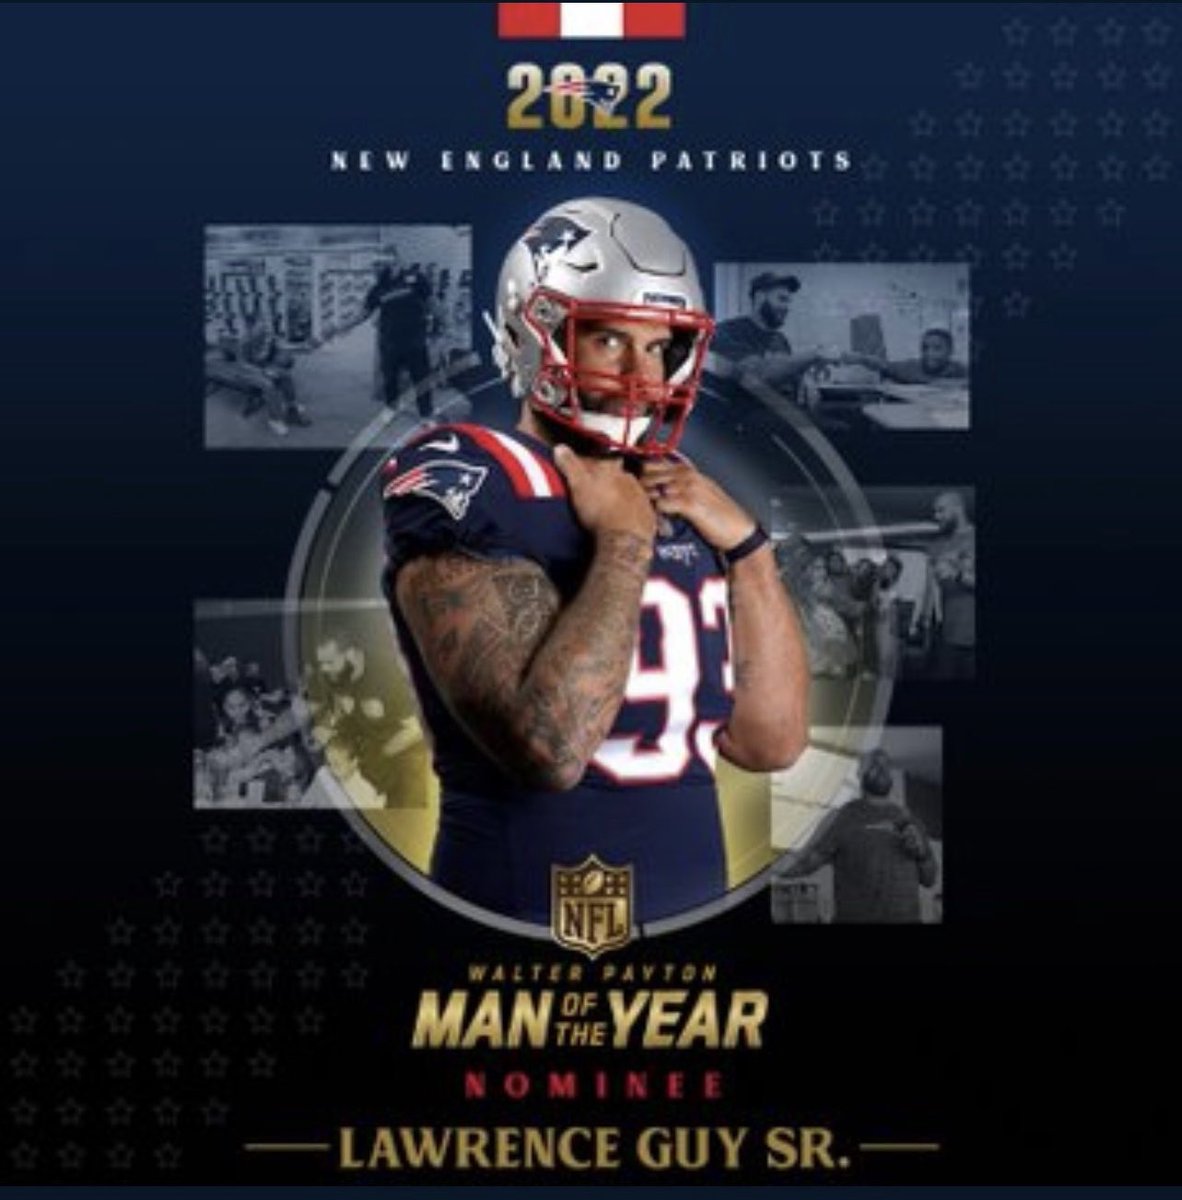 It is an honor to be nominated, and it would be an honor to win. Pats nation today's retweets count as double. #WPMOYChallenge Lawrence Guy #PatriotsNation #RT